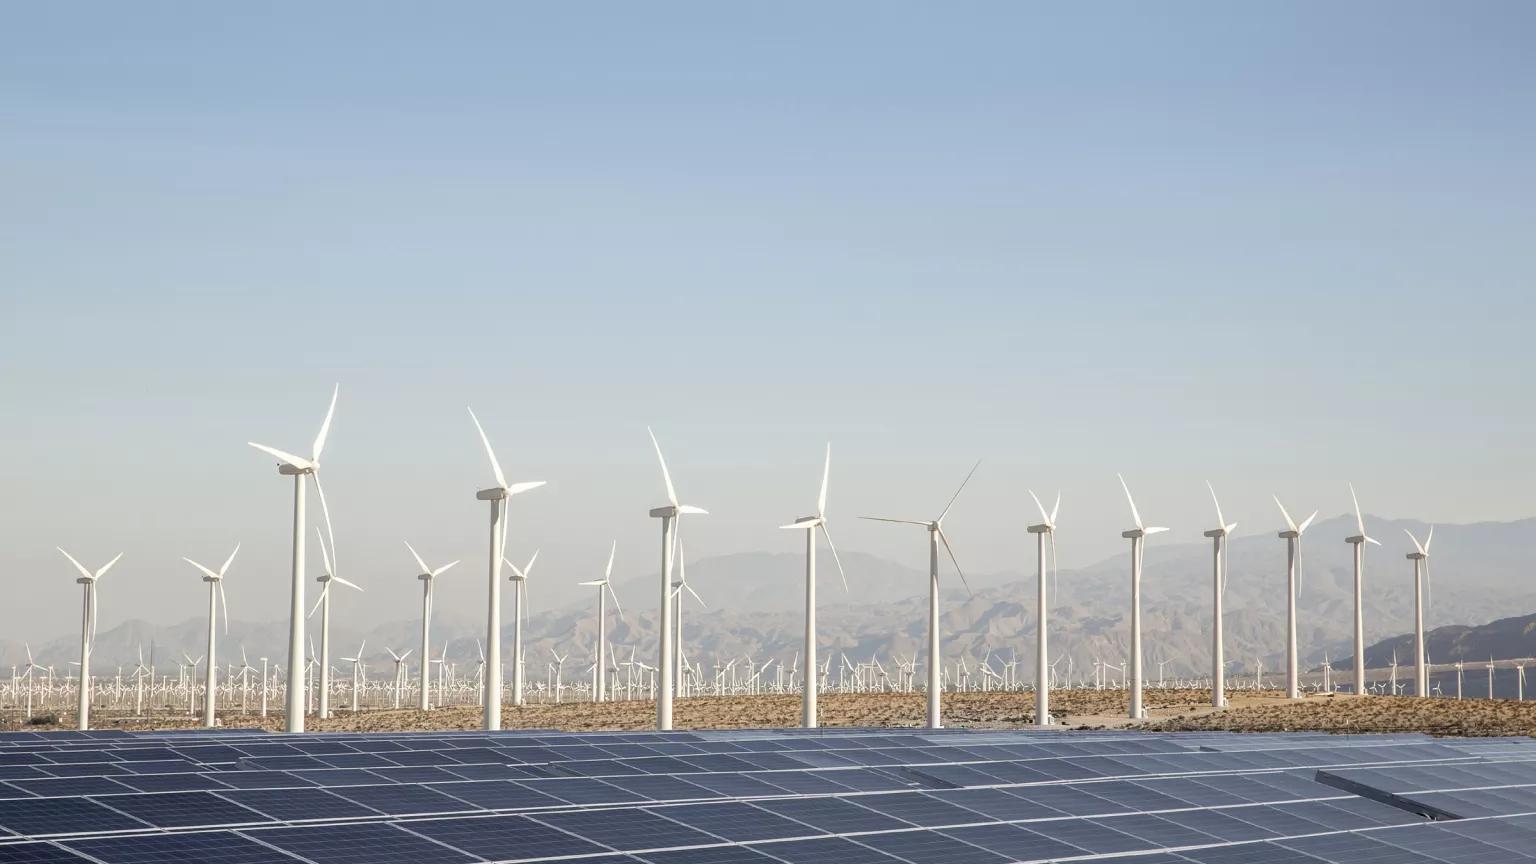 Dozens of wind turbines stand in rows behind a solar panel array with mountains in the distance